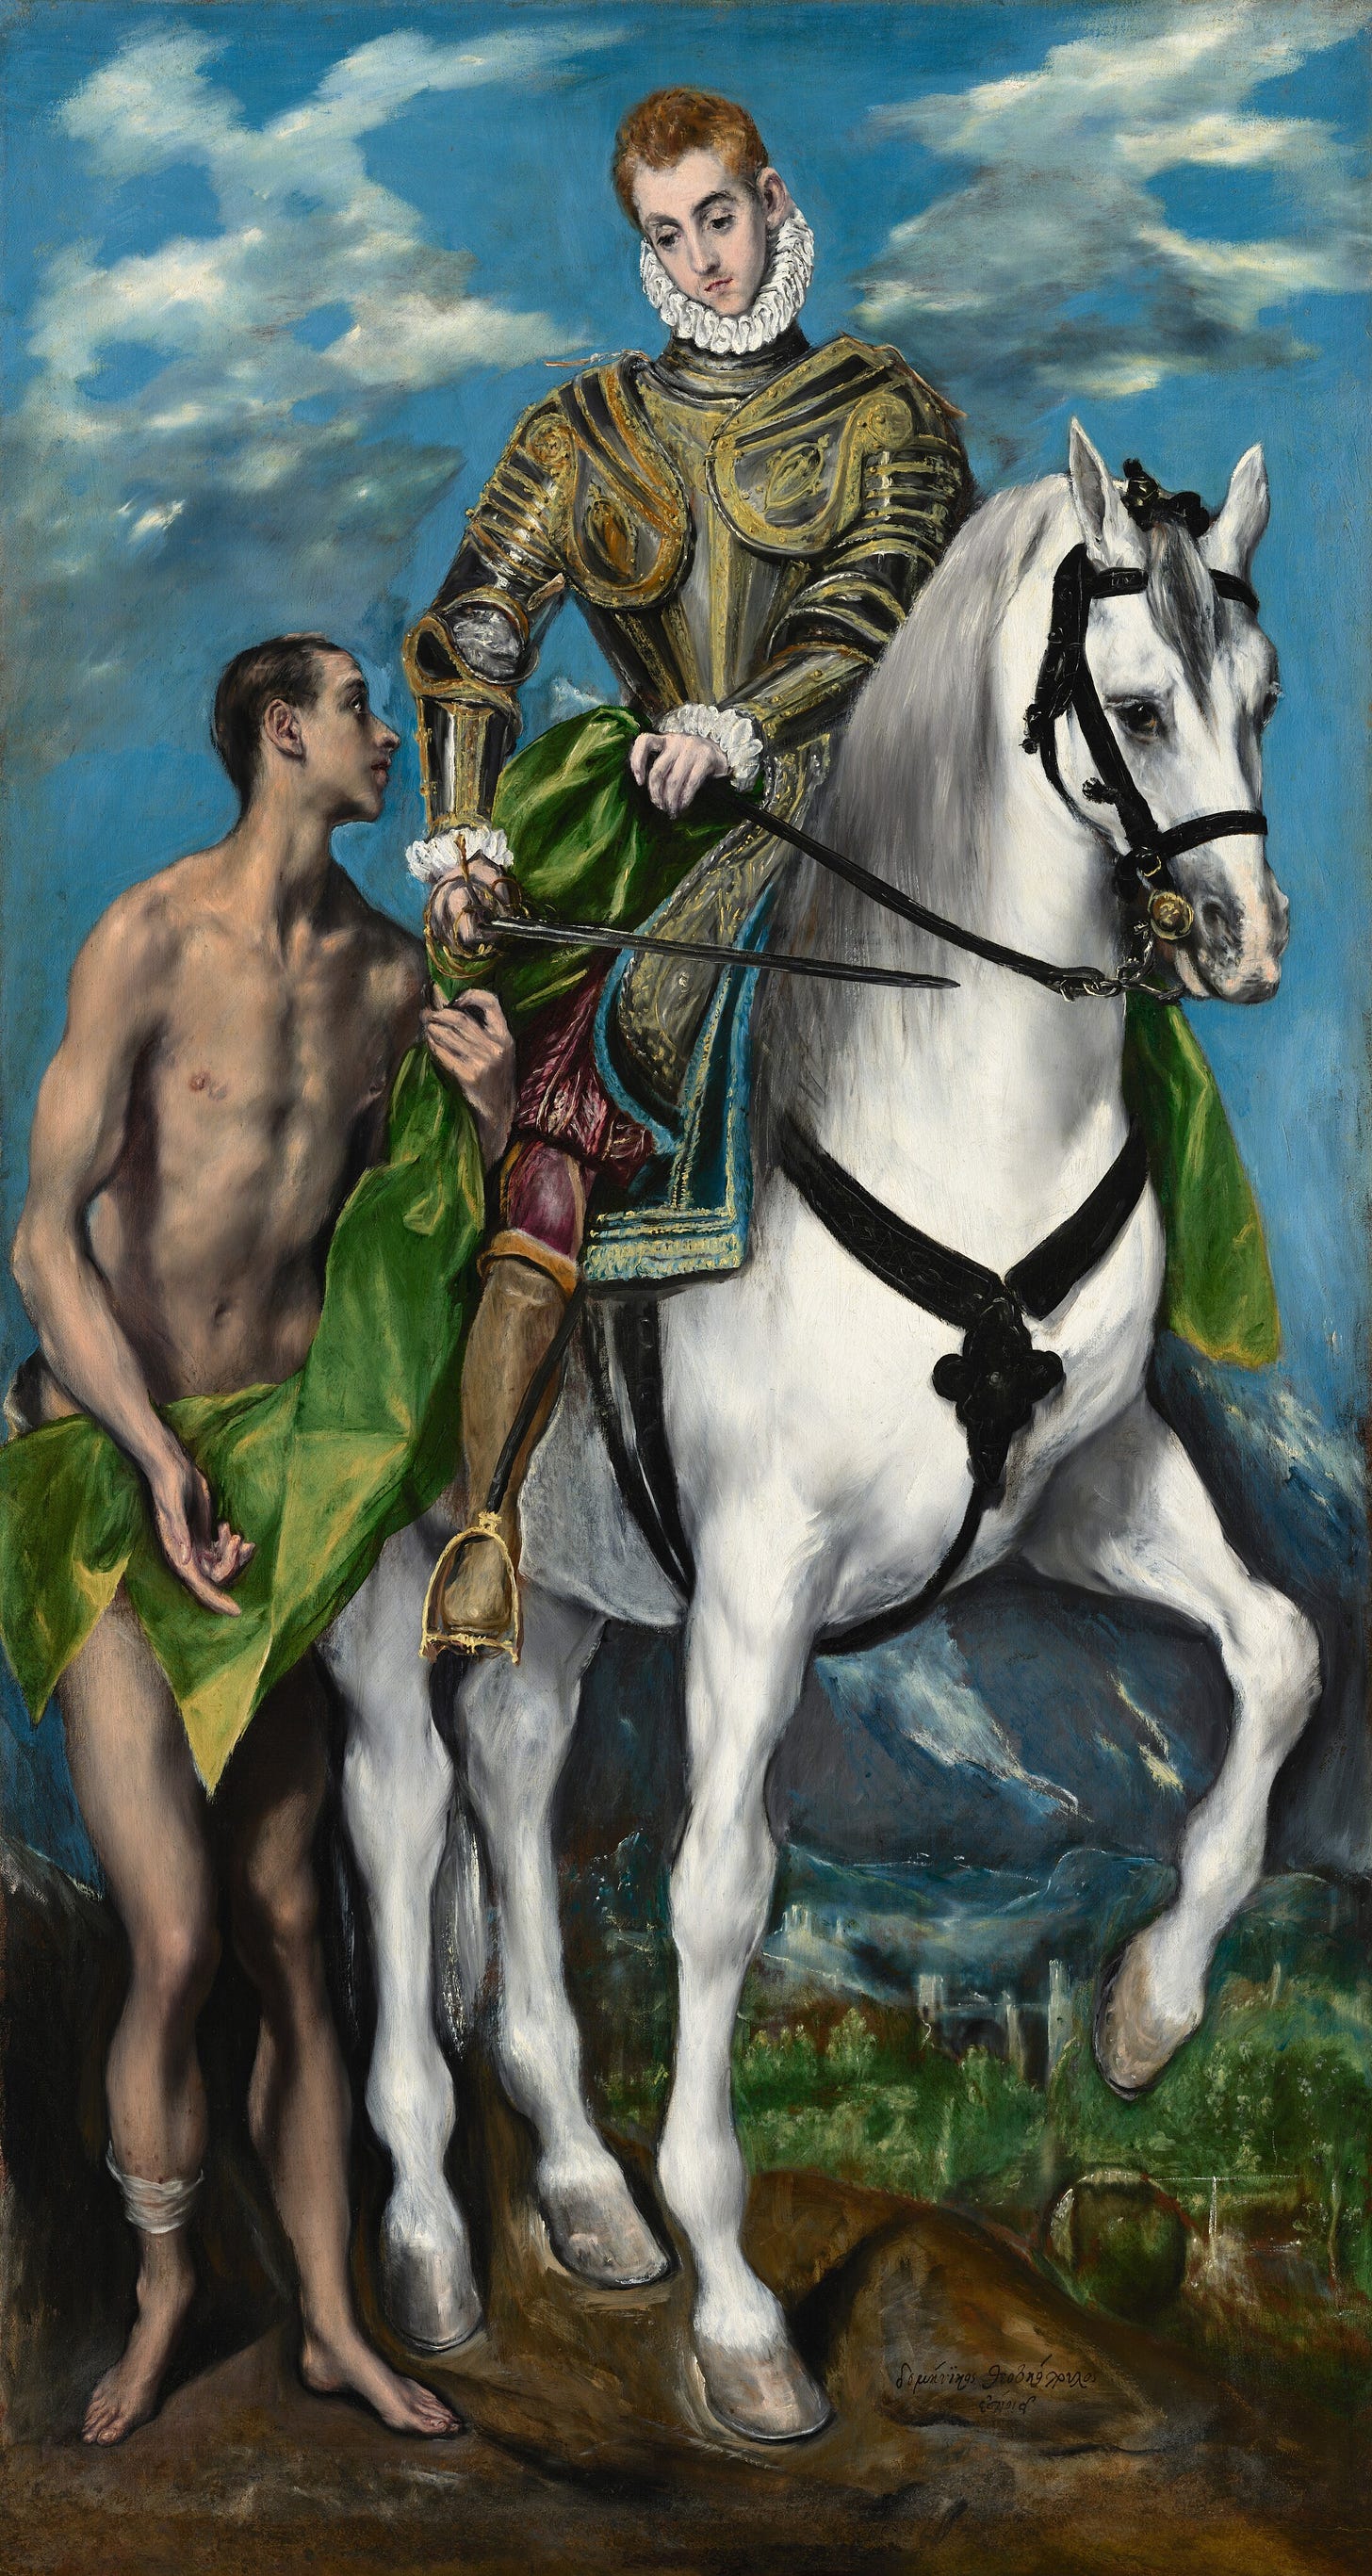 A painting by El Greco depicting Saint Martin of Tours on horseback giving a naked beggar his cloak.